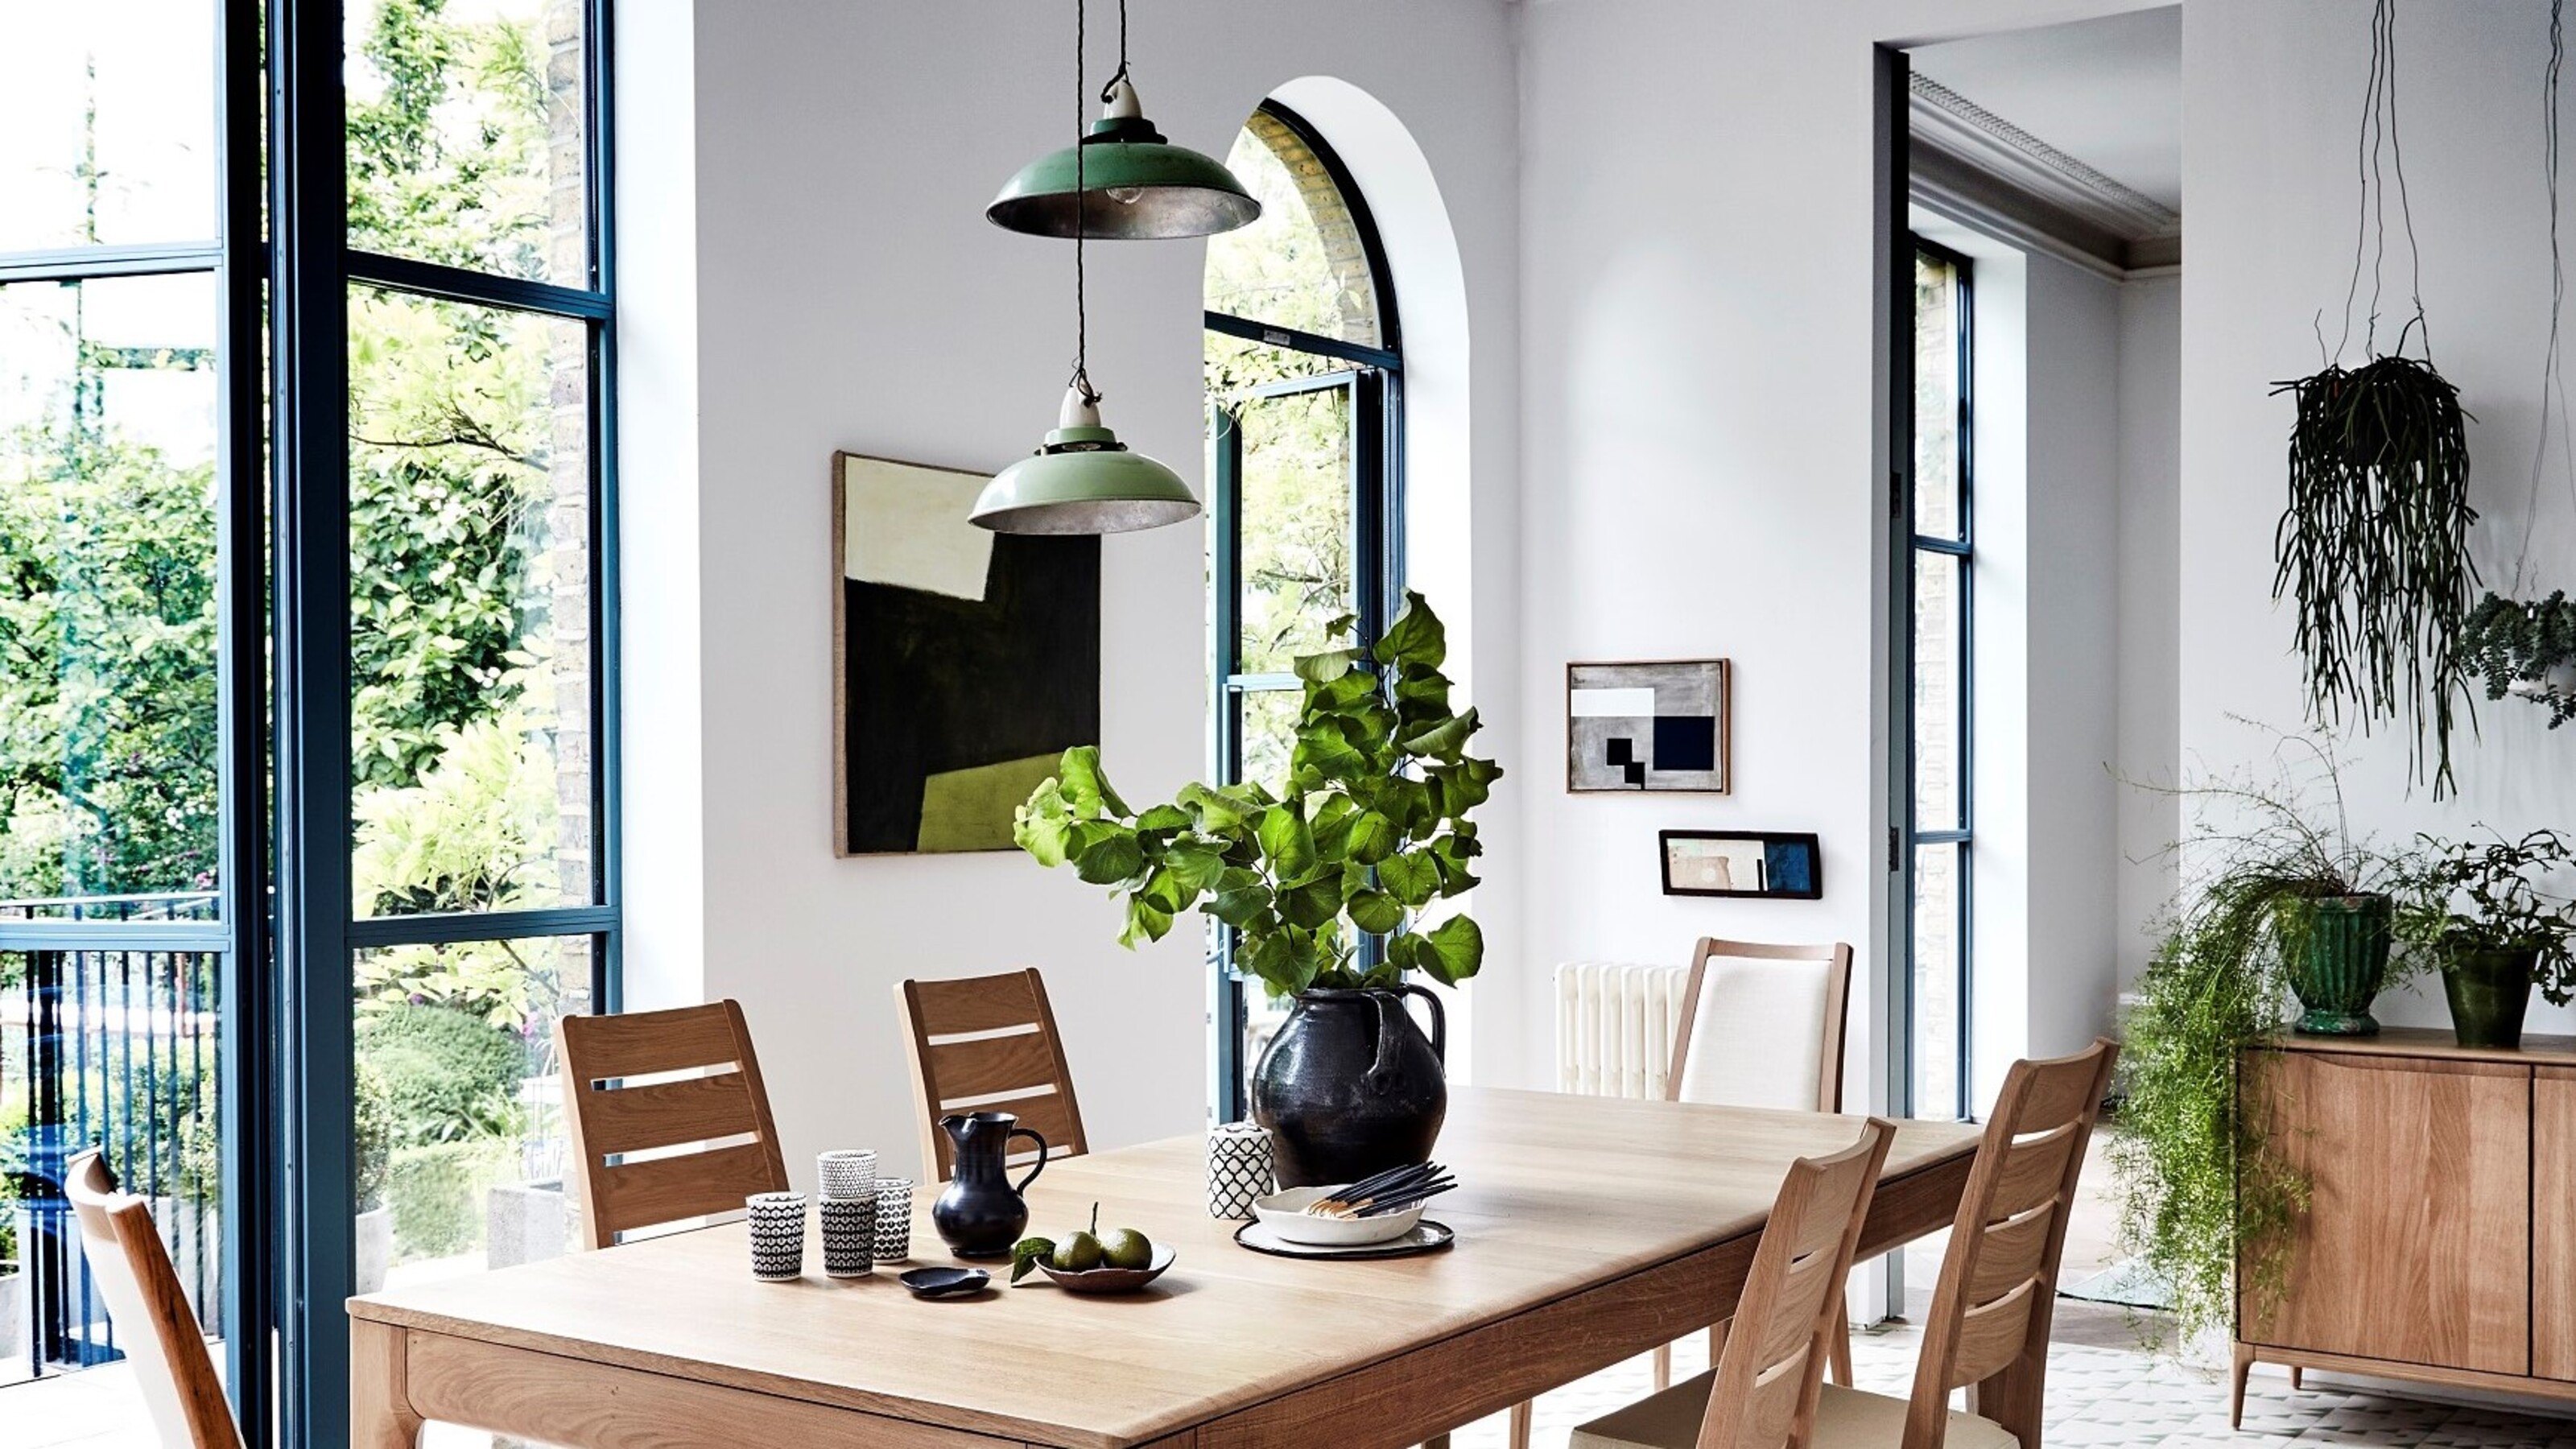 What type of light is best above a dining table